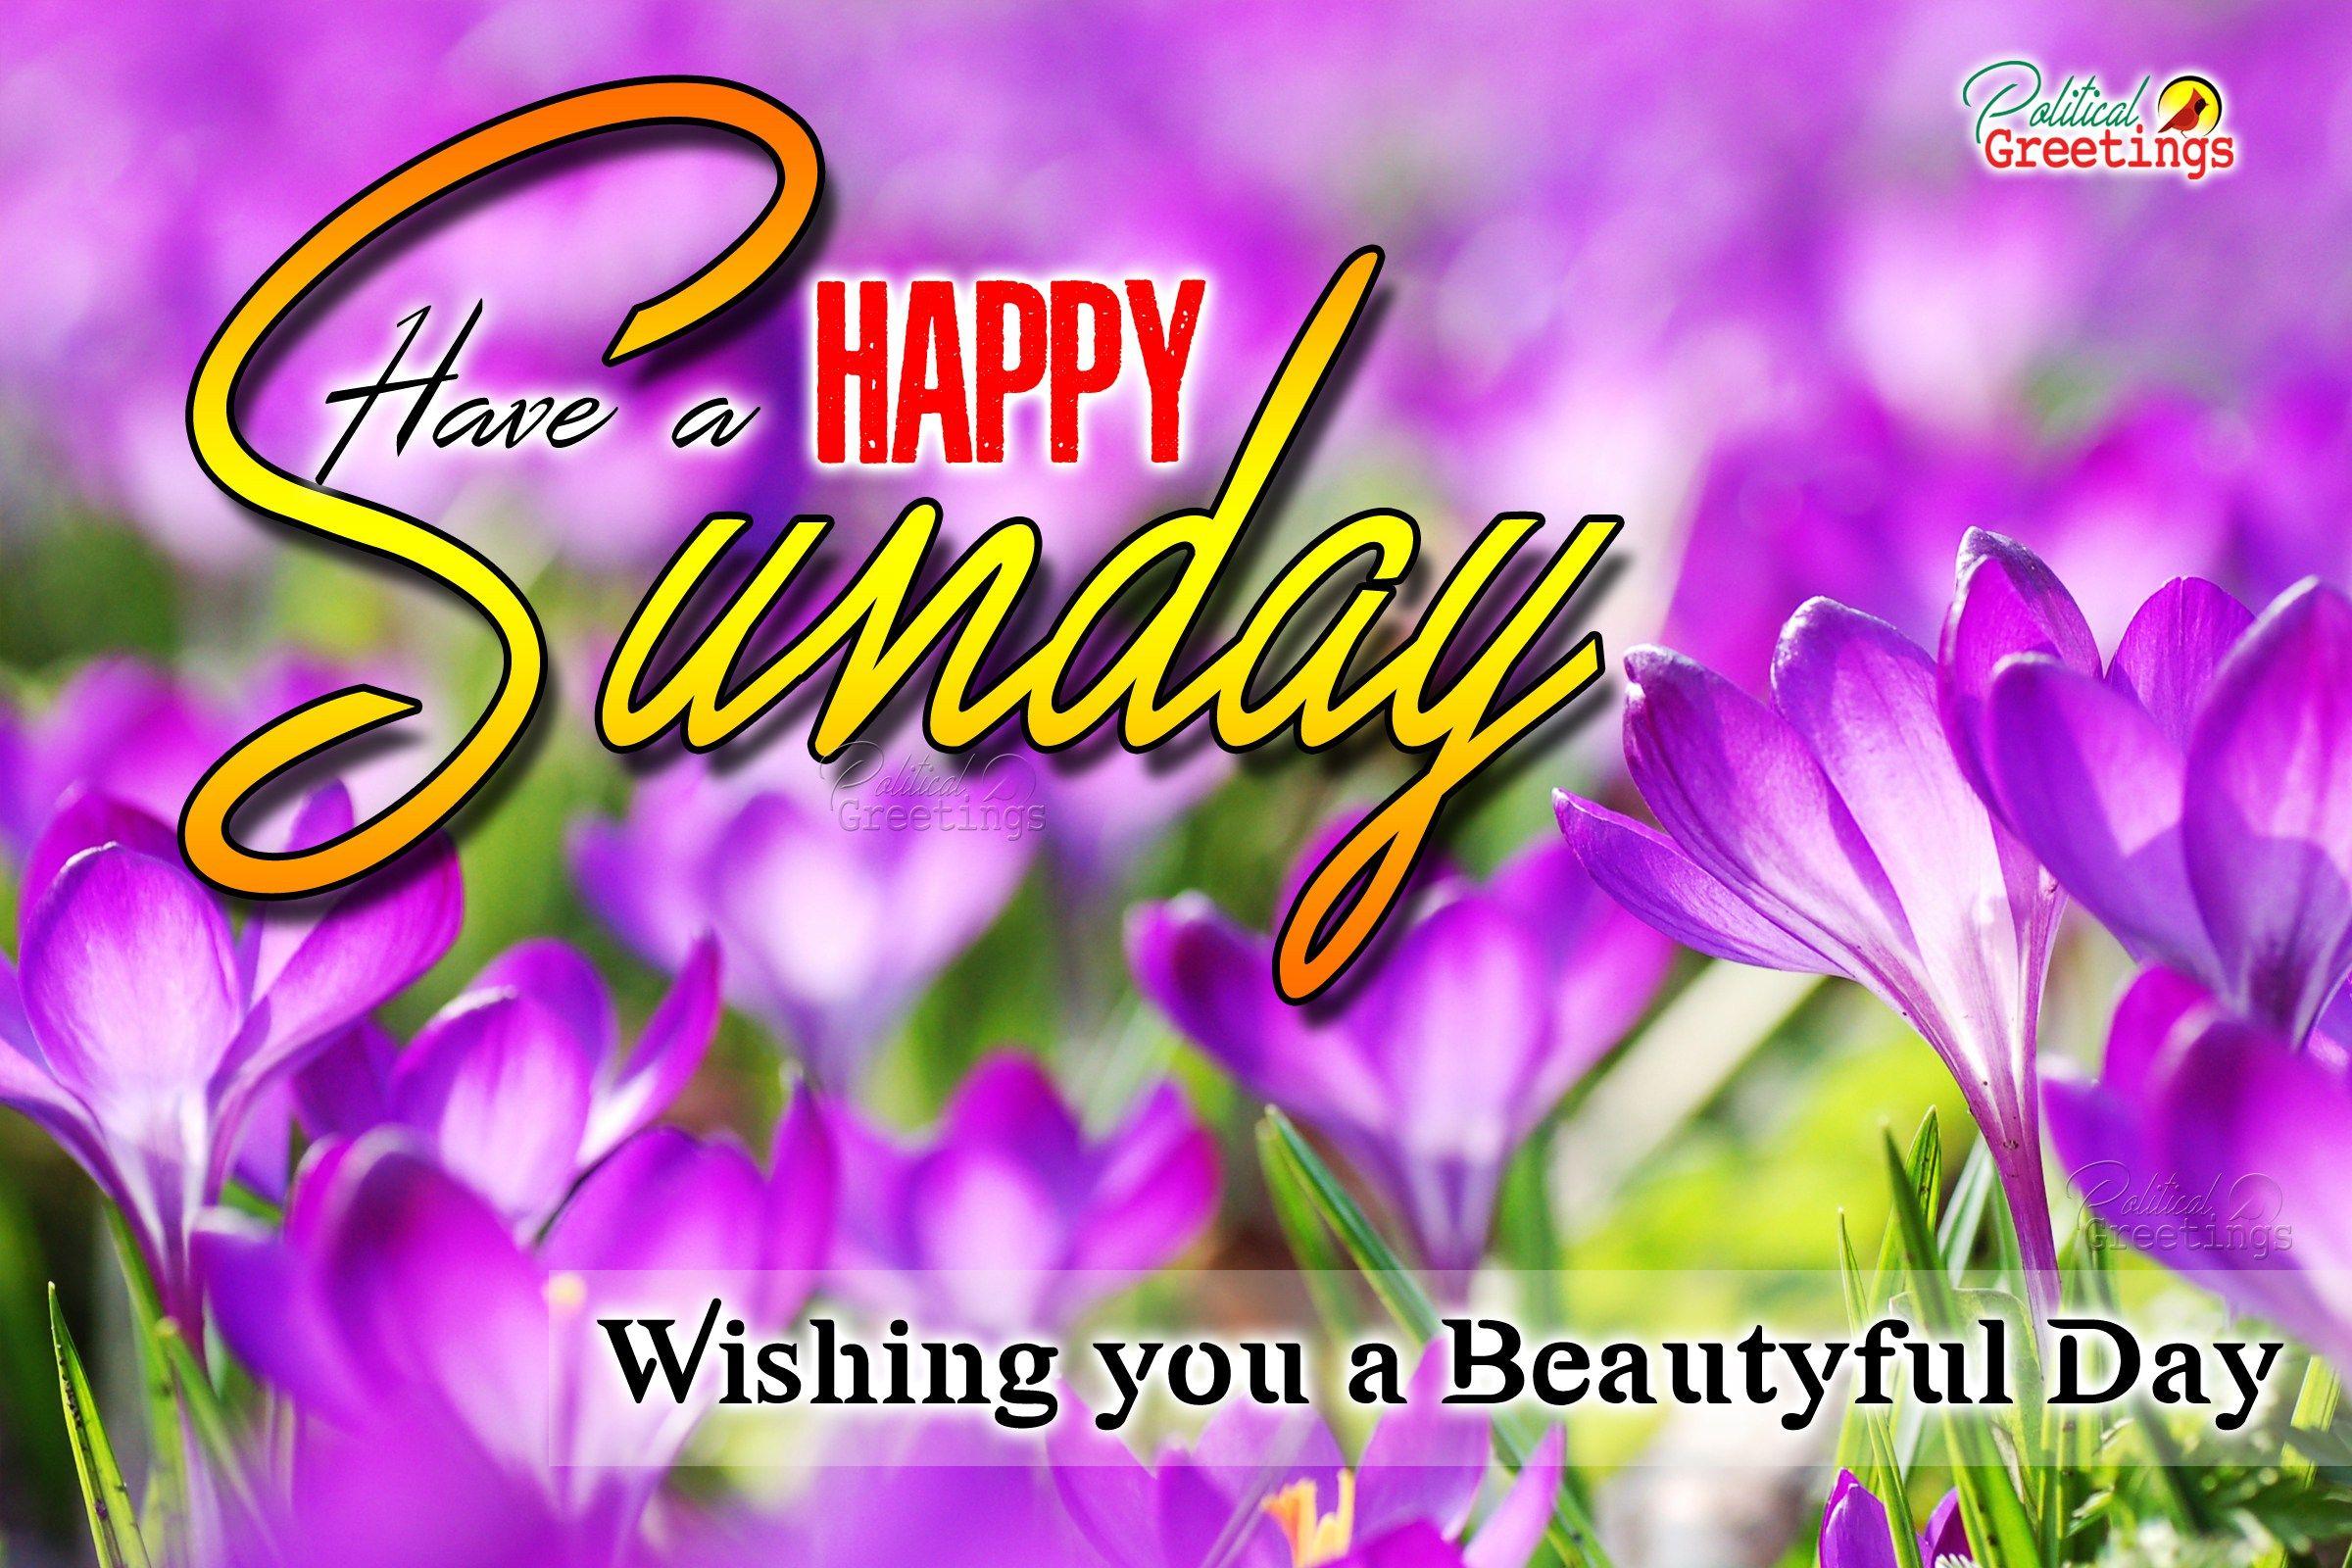 Have A Happy Sunday quotes wishes greetings Picture photo image